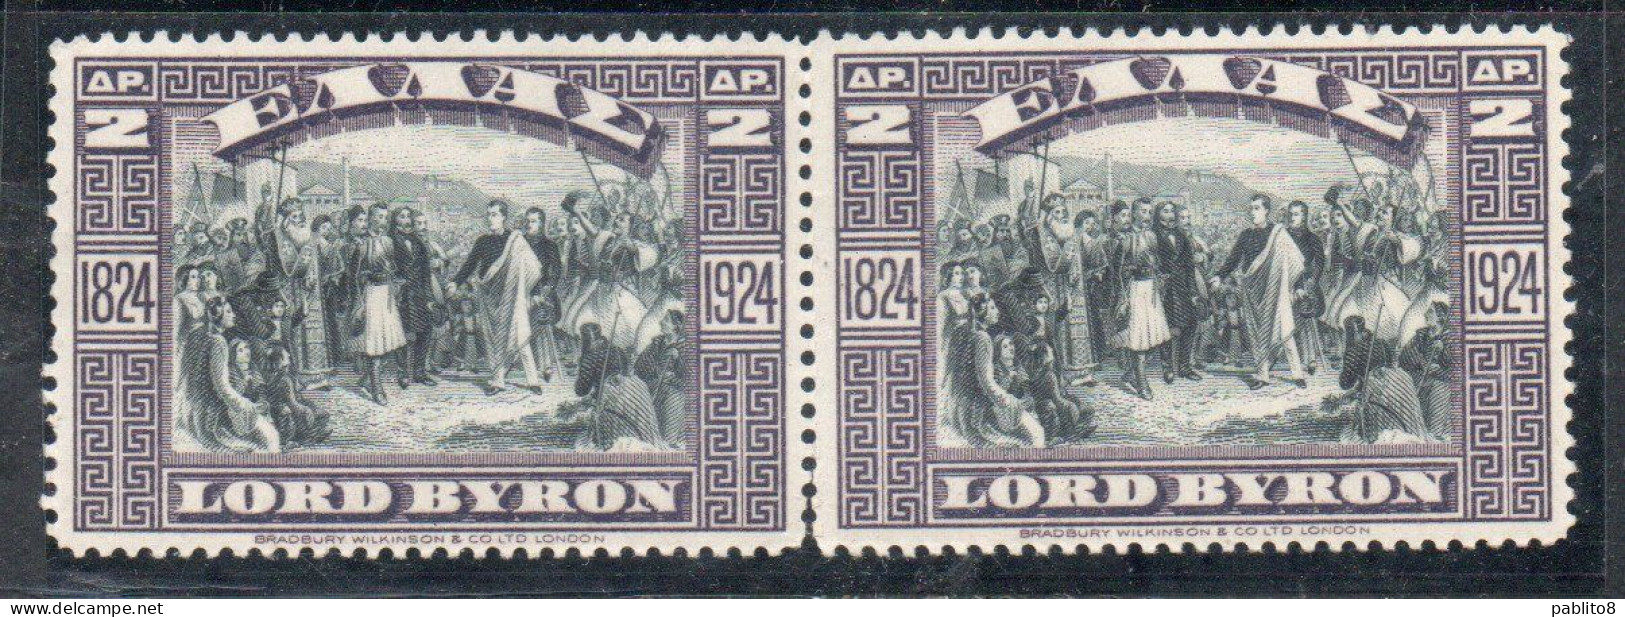 GREECE GRECIA HELLAS 1924 LORD BYRON AT MISSOLONGHI 2d MNH - Unused Stamps